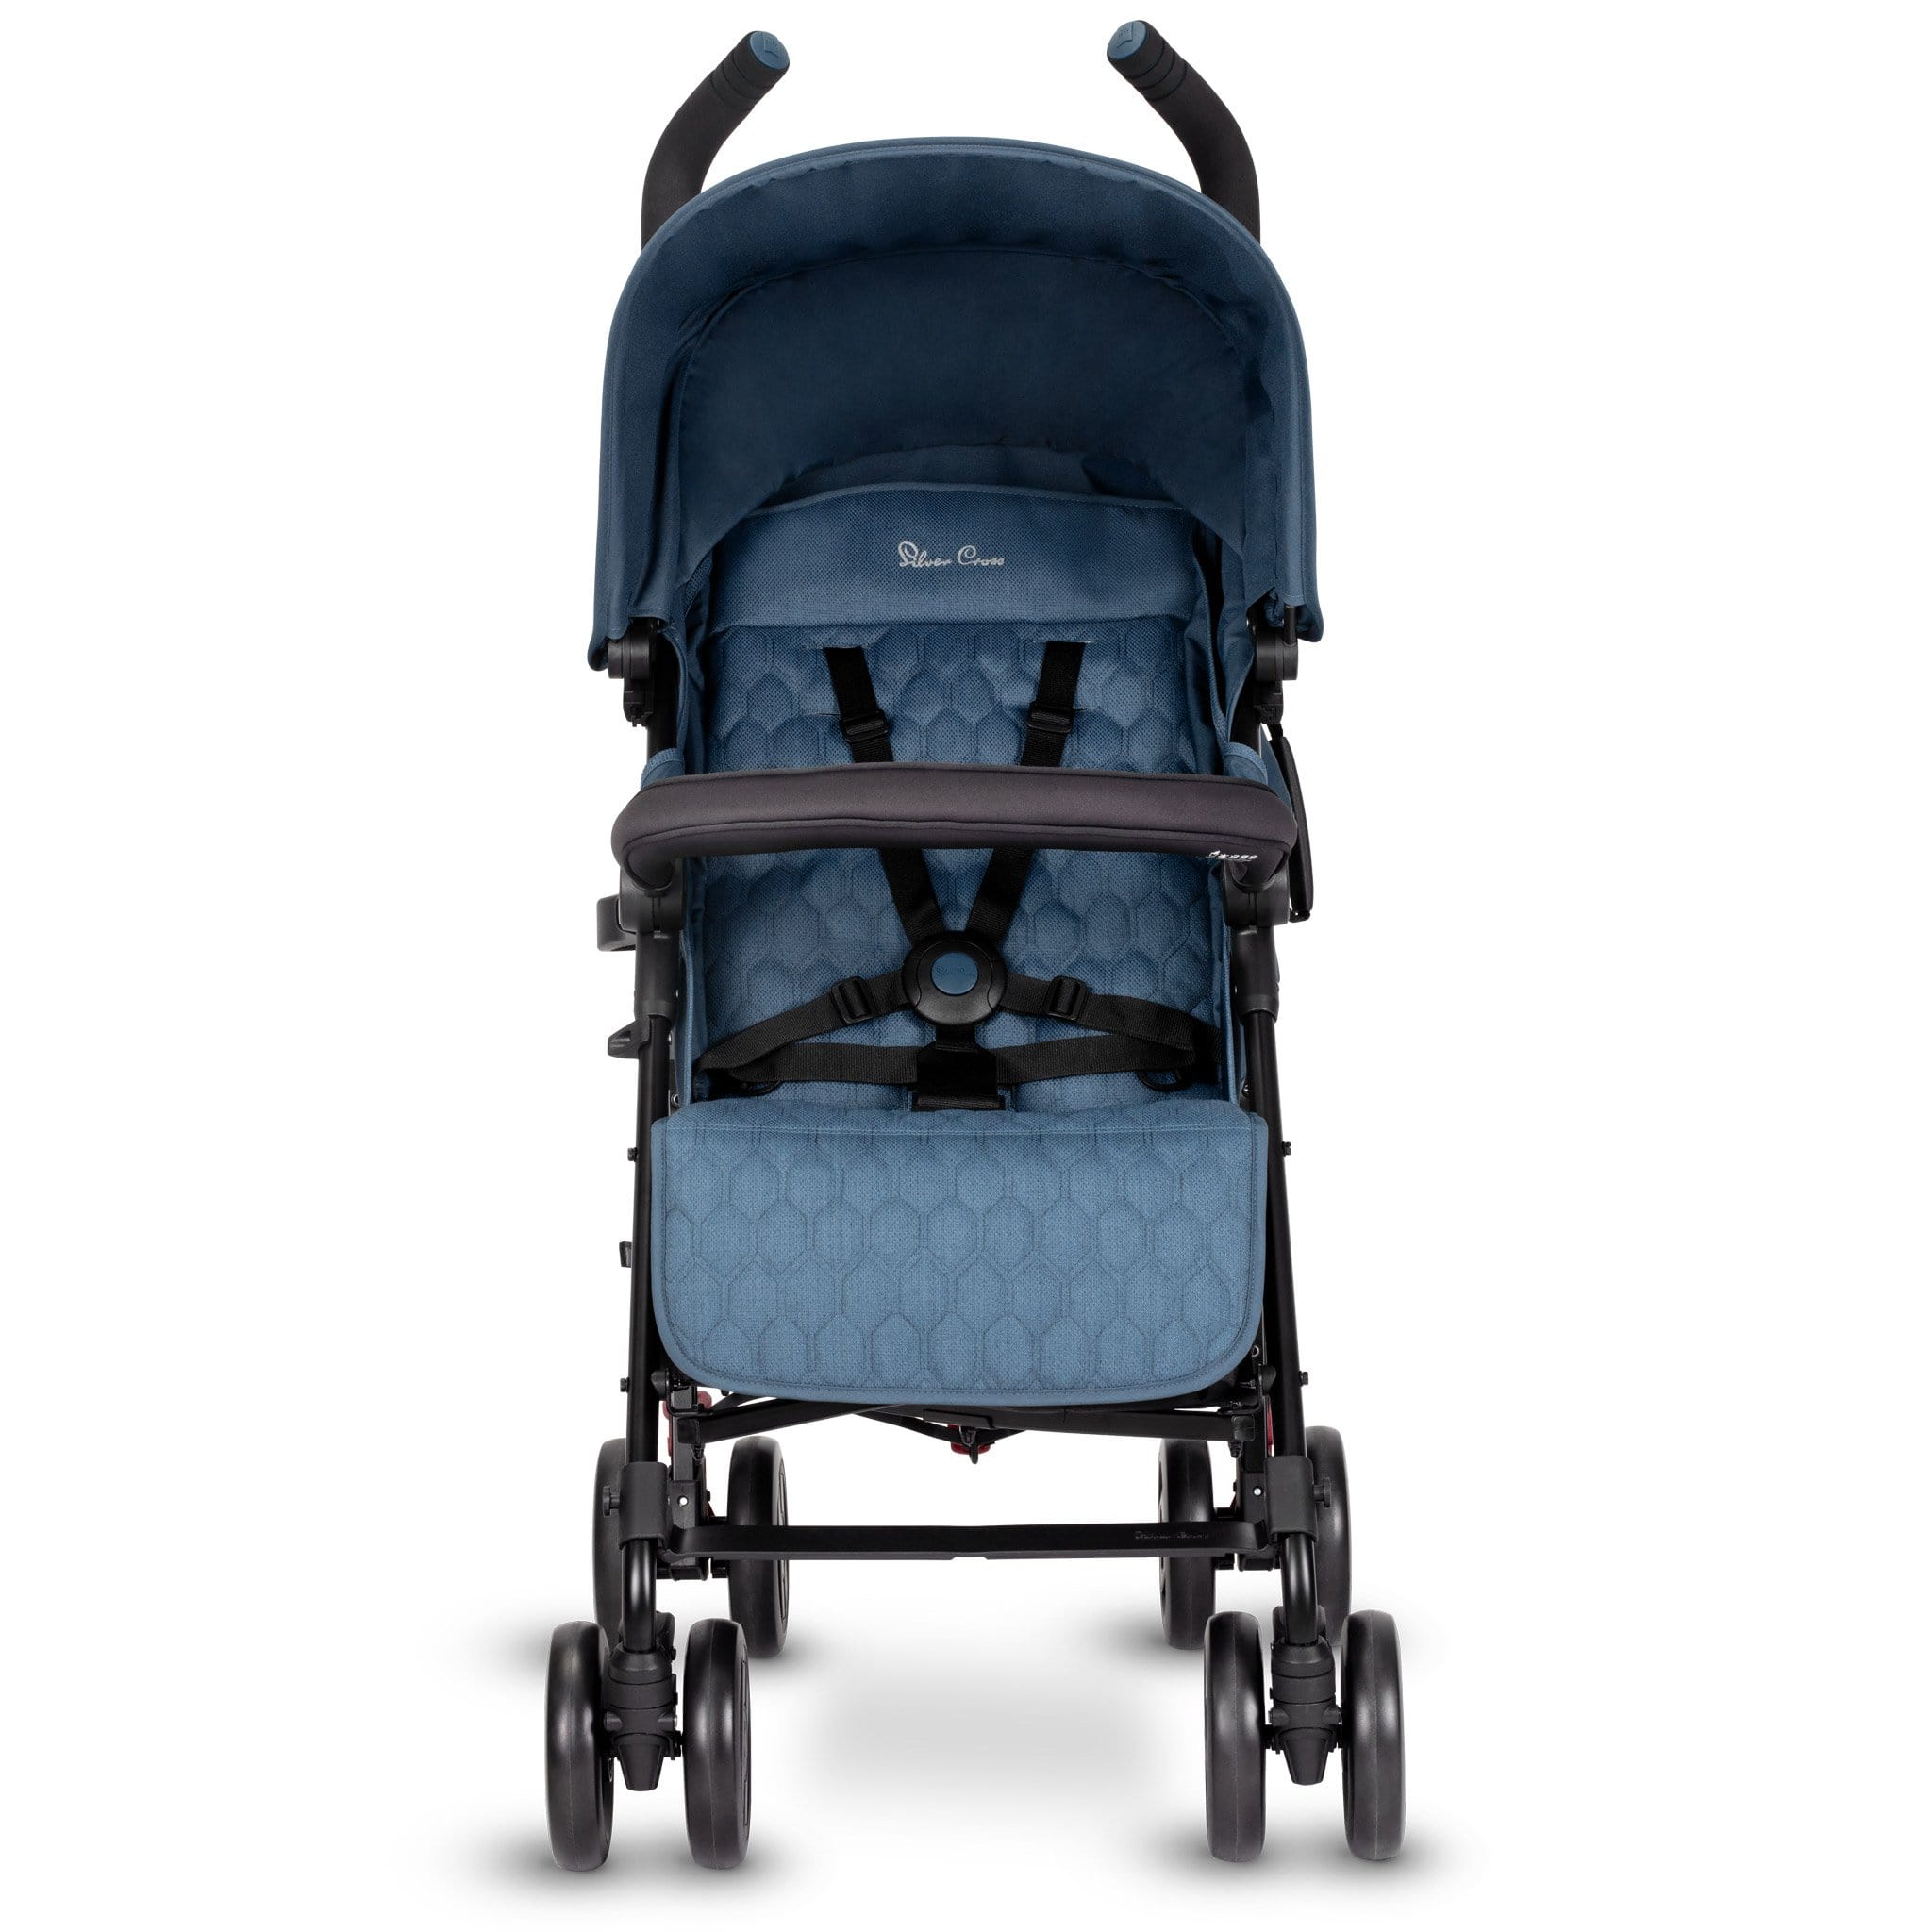 Silver Cross Pop Stroller With Free Footmuff in Bilberry Pushchairs & Buggies 10439-BIL 5055836920997